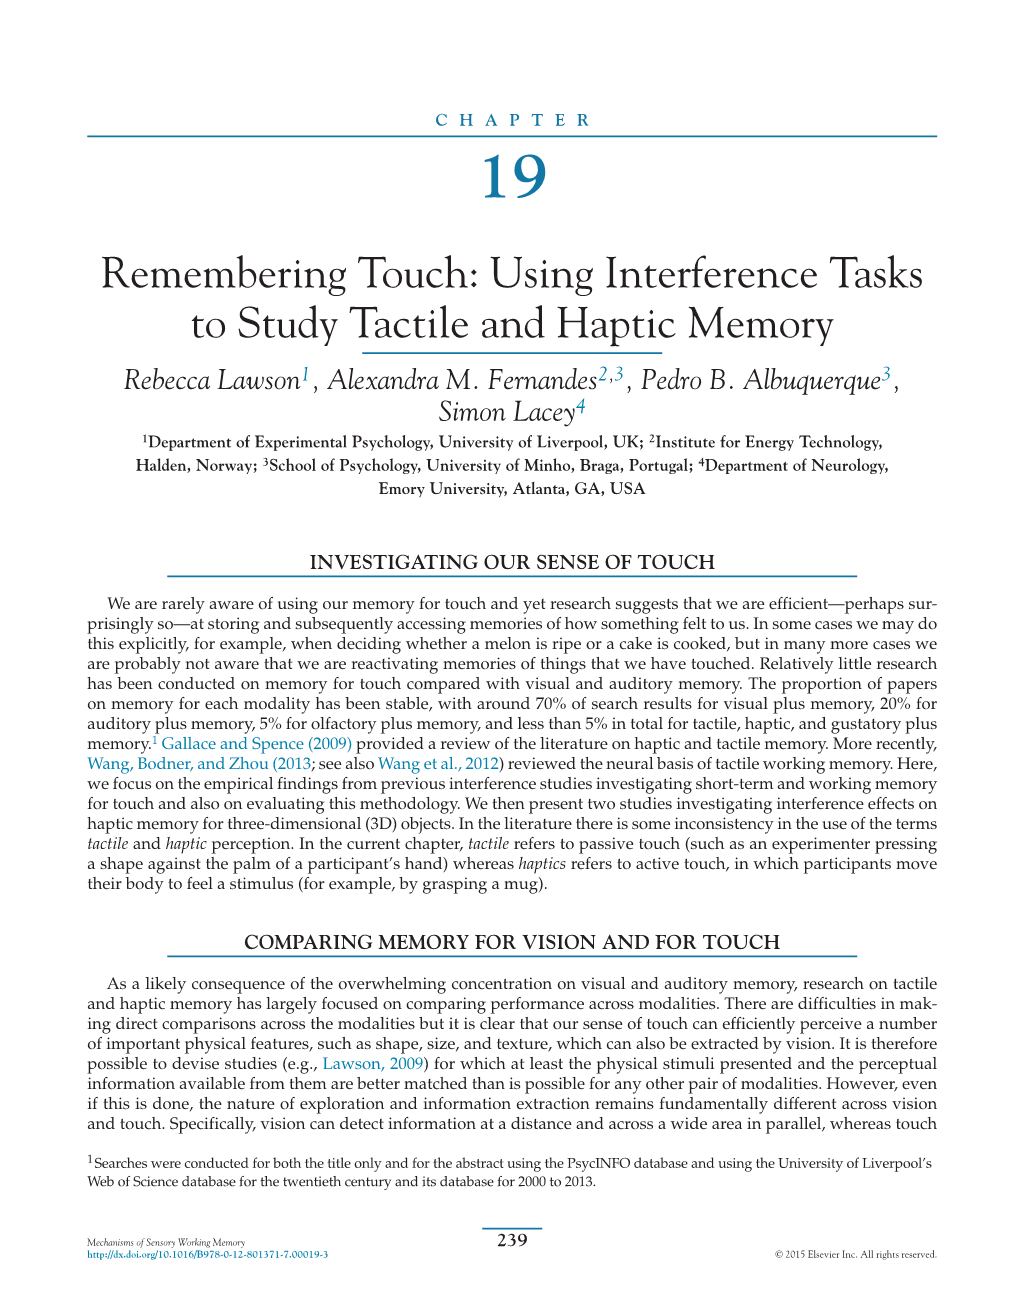 Using Interference Tasks to Study Tactile and Haptic Memory Rebecca Lawson1, Alexandra M